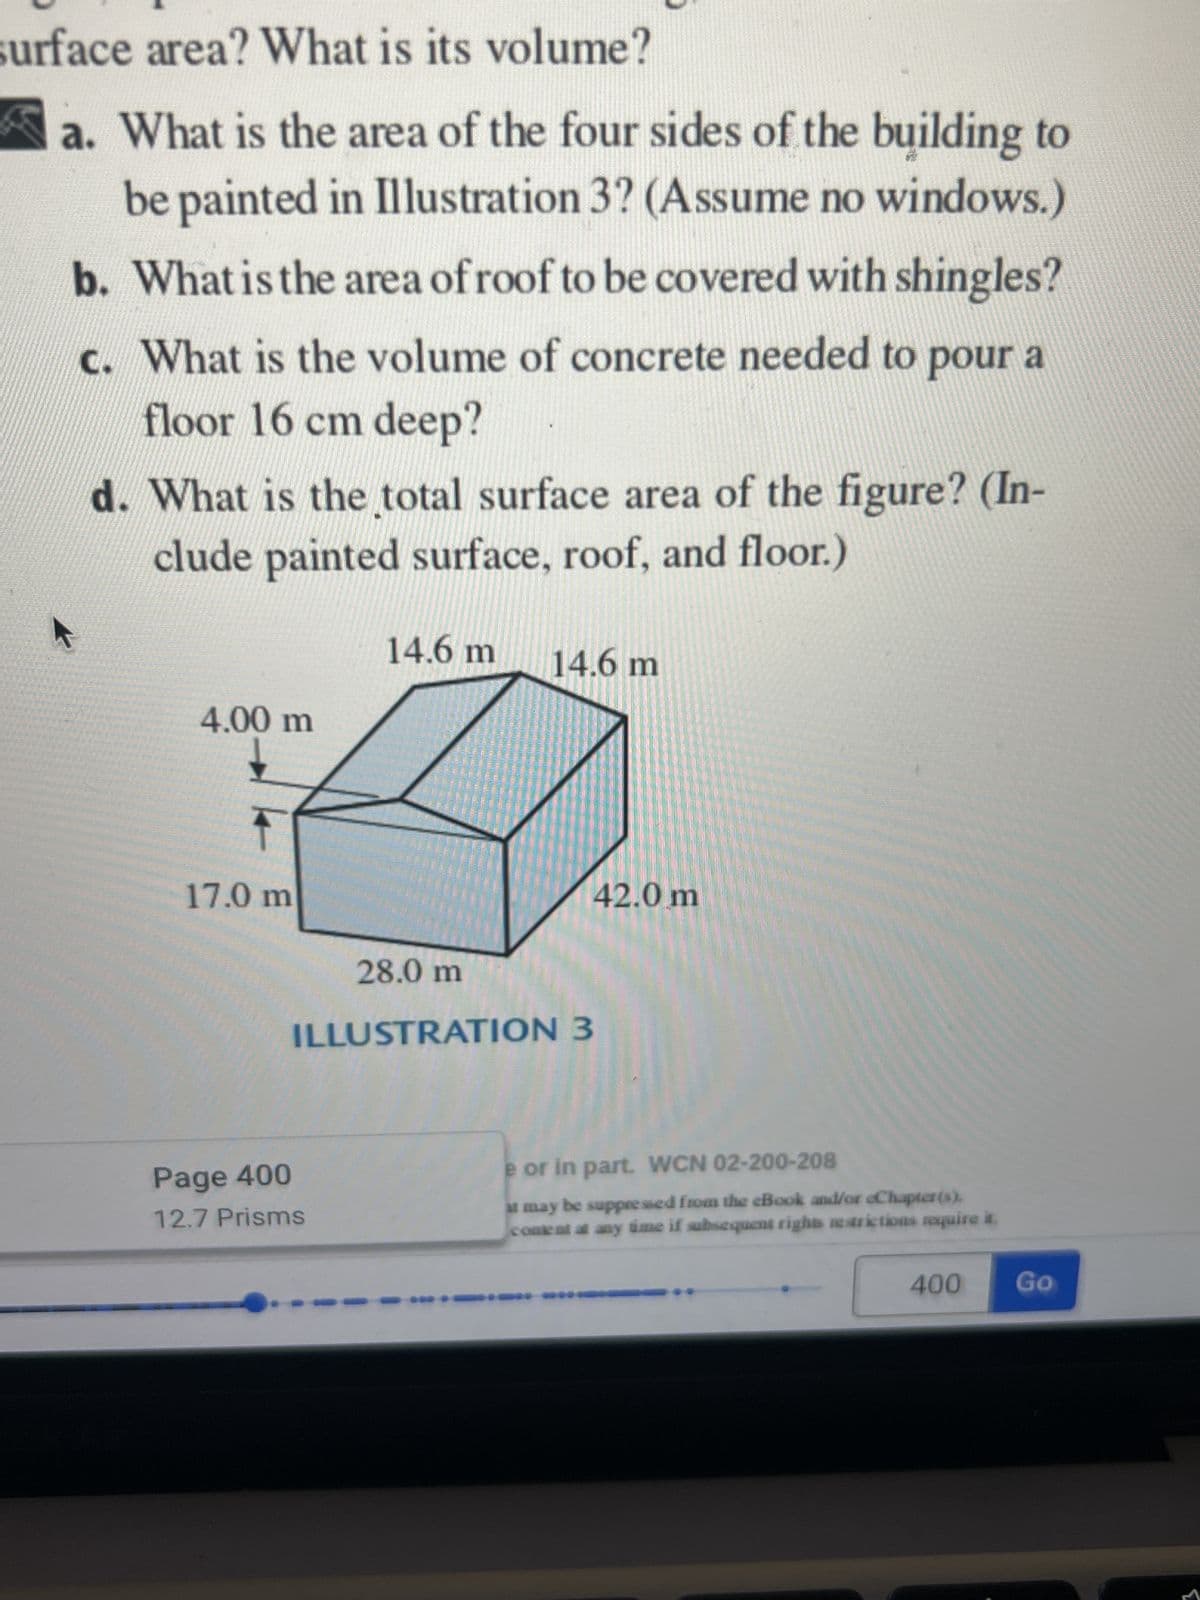 surface area? What is its volume?
a. What is the area of the four sides of the building to
be painted in Illustration 3? (Assume no windows.)
b. What is the area of roof to be covered with shingles?
c. What is the volume of concrete needed to pour a
floor 16 cm deep?
d. What is the total surface area of the figure? (In-
clude painted surface, roof, and floor.)
4.00 m
17.0 m
14.6 m
Page 400
12.7 Prisms
14.6 m
28.0 m
ILLUSTRATION 3
42.0 m
e or in part. WCN 02-200-208
it may be suppressed from the eBook and/or eChapter(s).
content at any time if subsequent rights restrictions require it.
** *0
400
Go
M